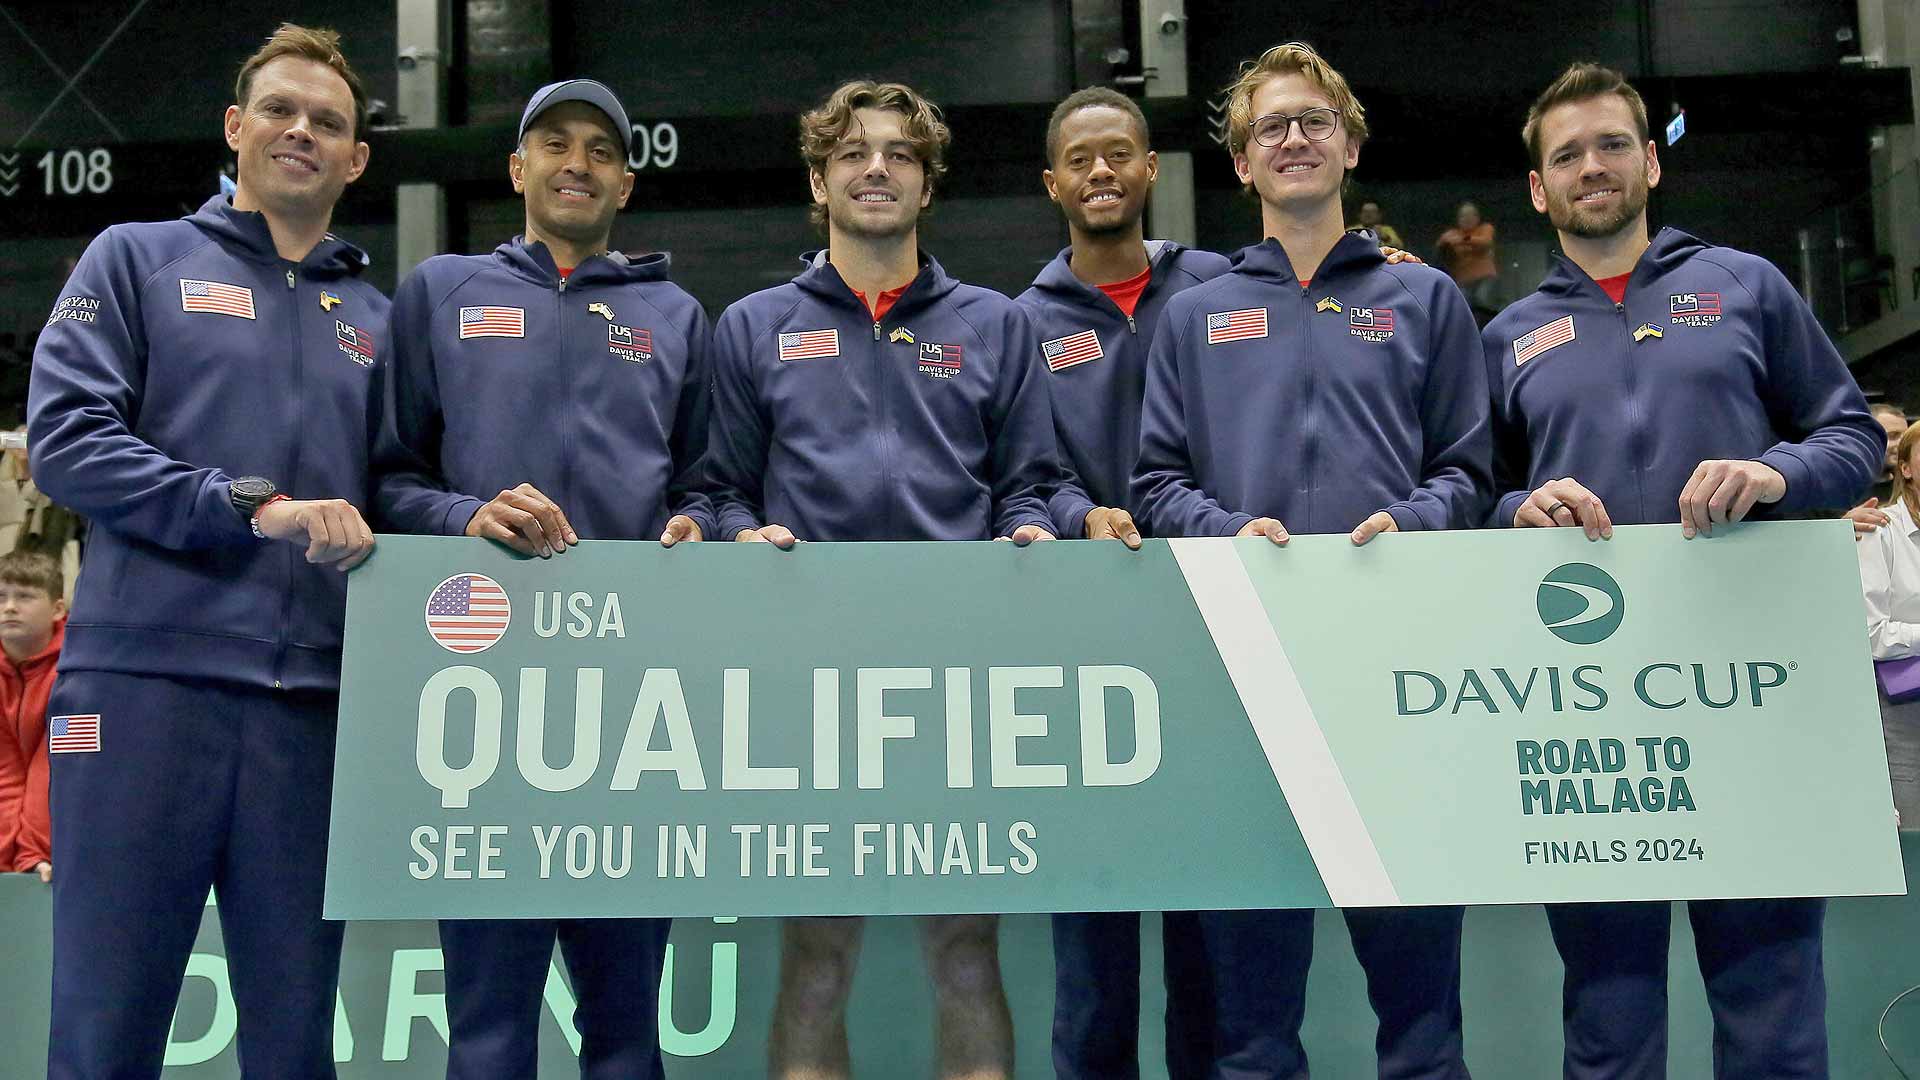 The USA was among the nations to book its Davis Cup Finals spot at February's qualifiers.